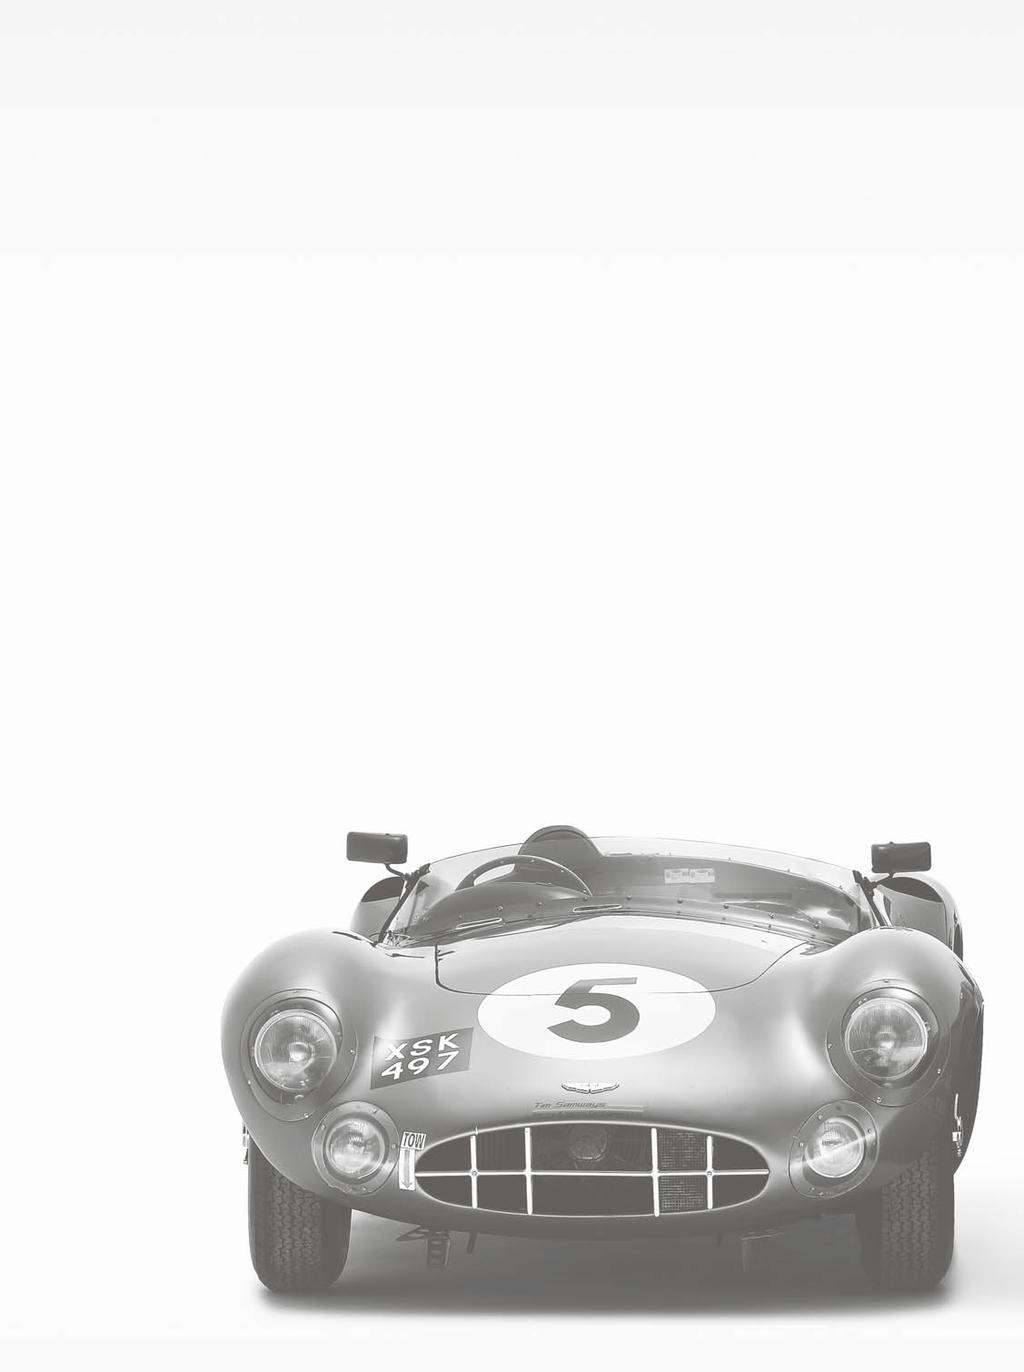 56 Virage Heritage HERITAGE Aston Martin has been delighting discerning drivers with fabulous cars of unmatched pedigree and sporting prowess for almost a century.